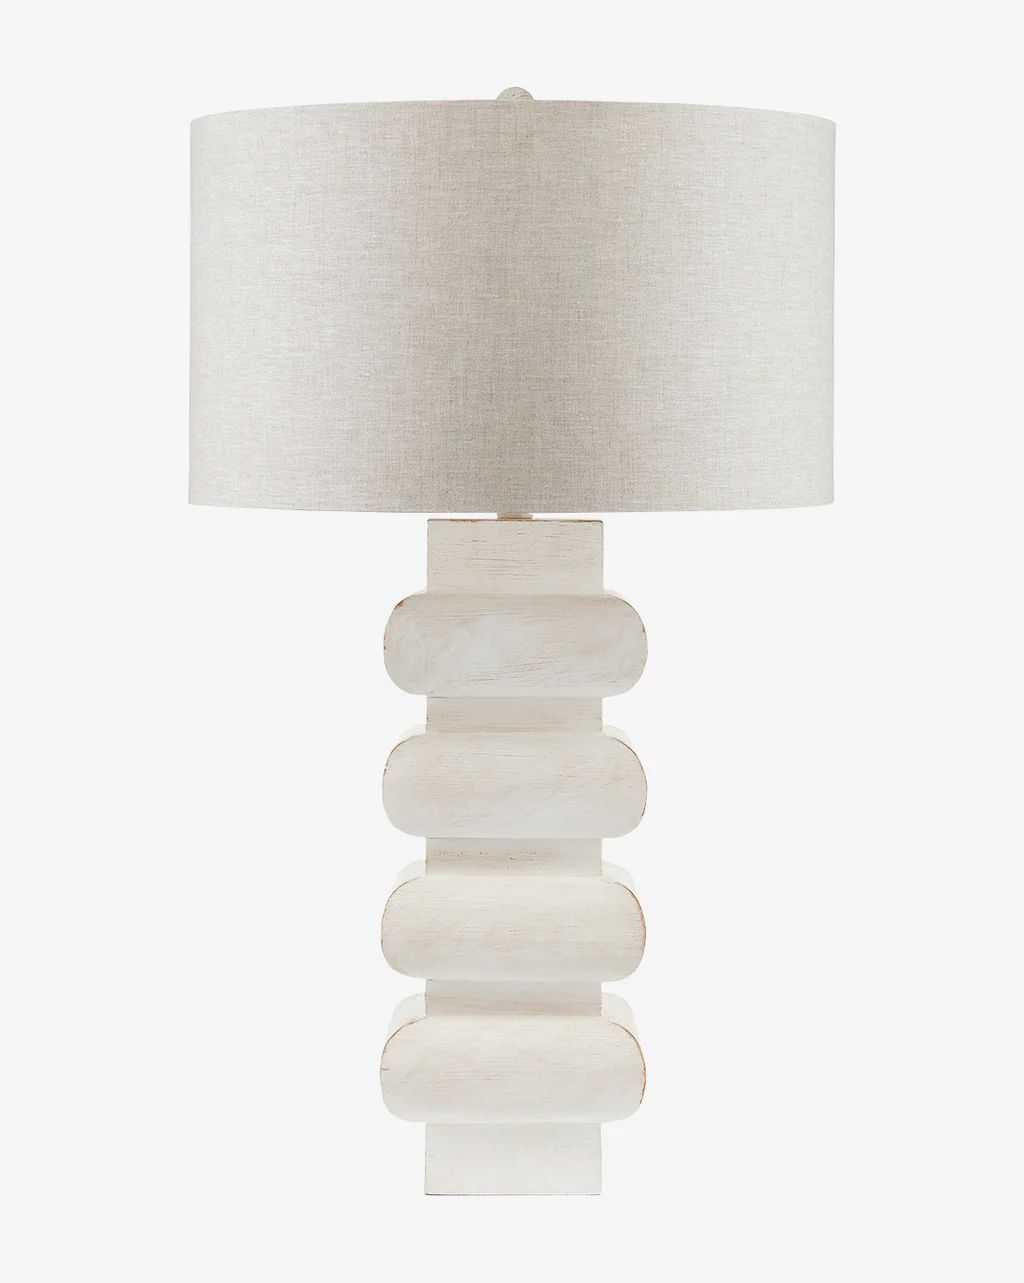 Blondel Table Lamp | McGee & Co.